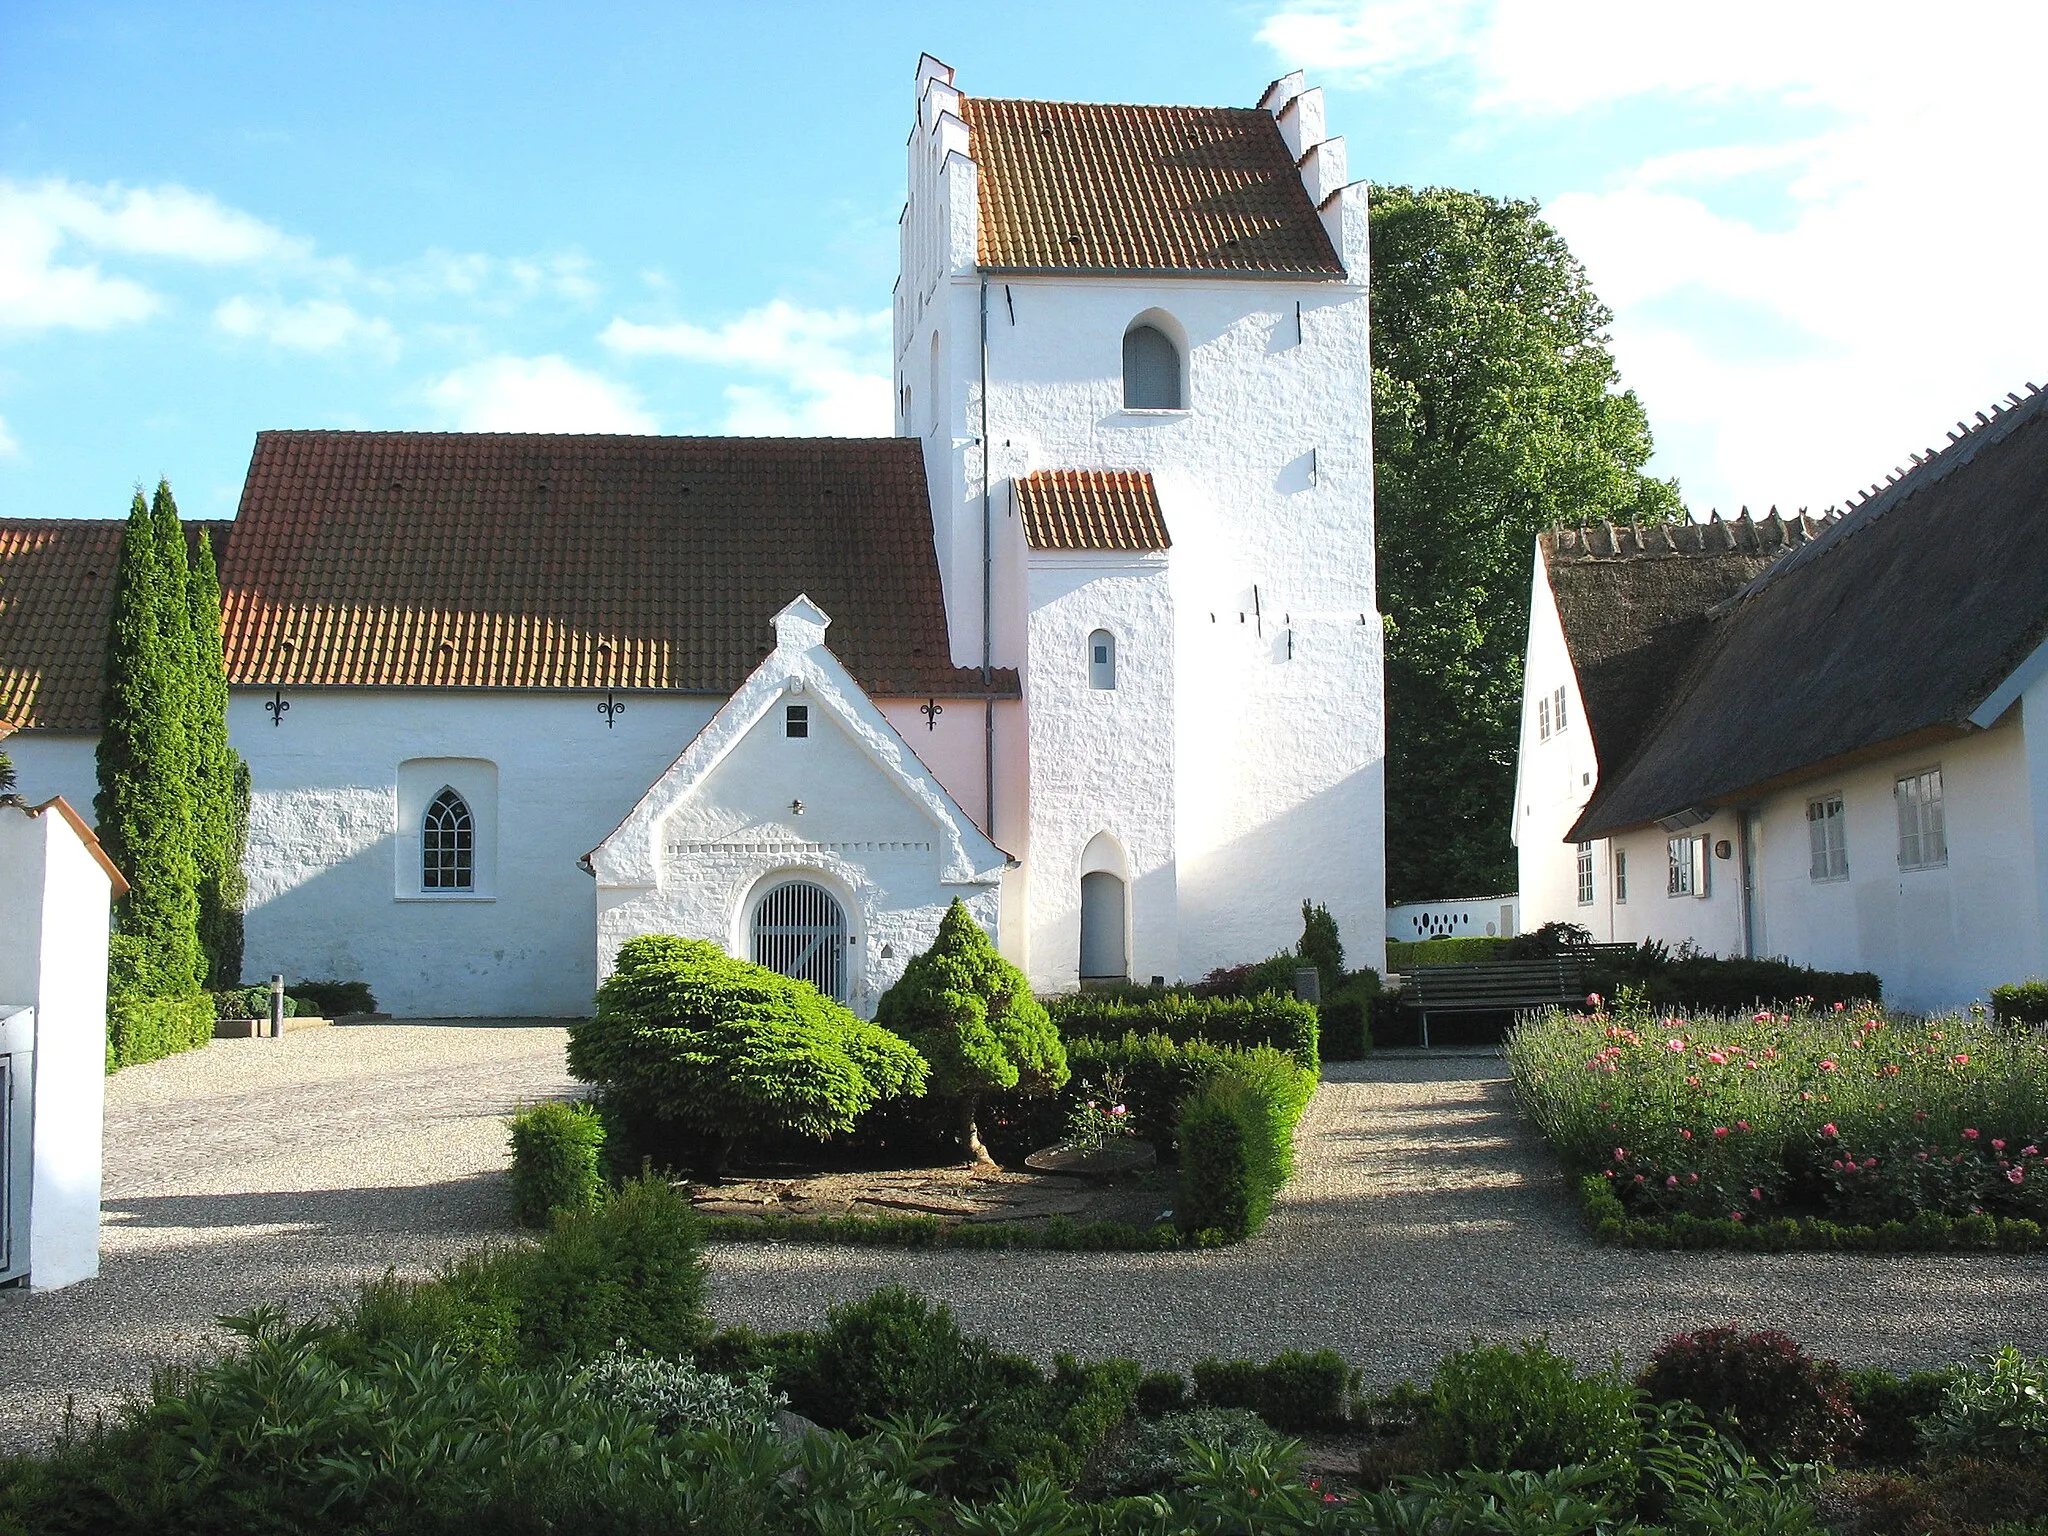 Photo showing: The church "Greve Kirke" in the village "Greve". The place is located in North East Zealand in east Denmark.